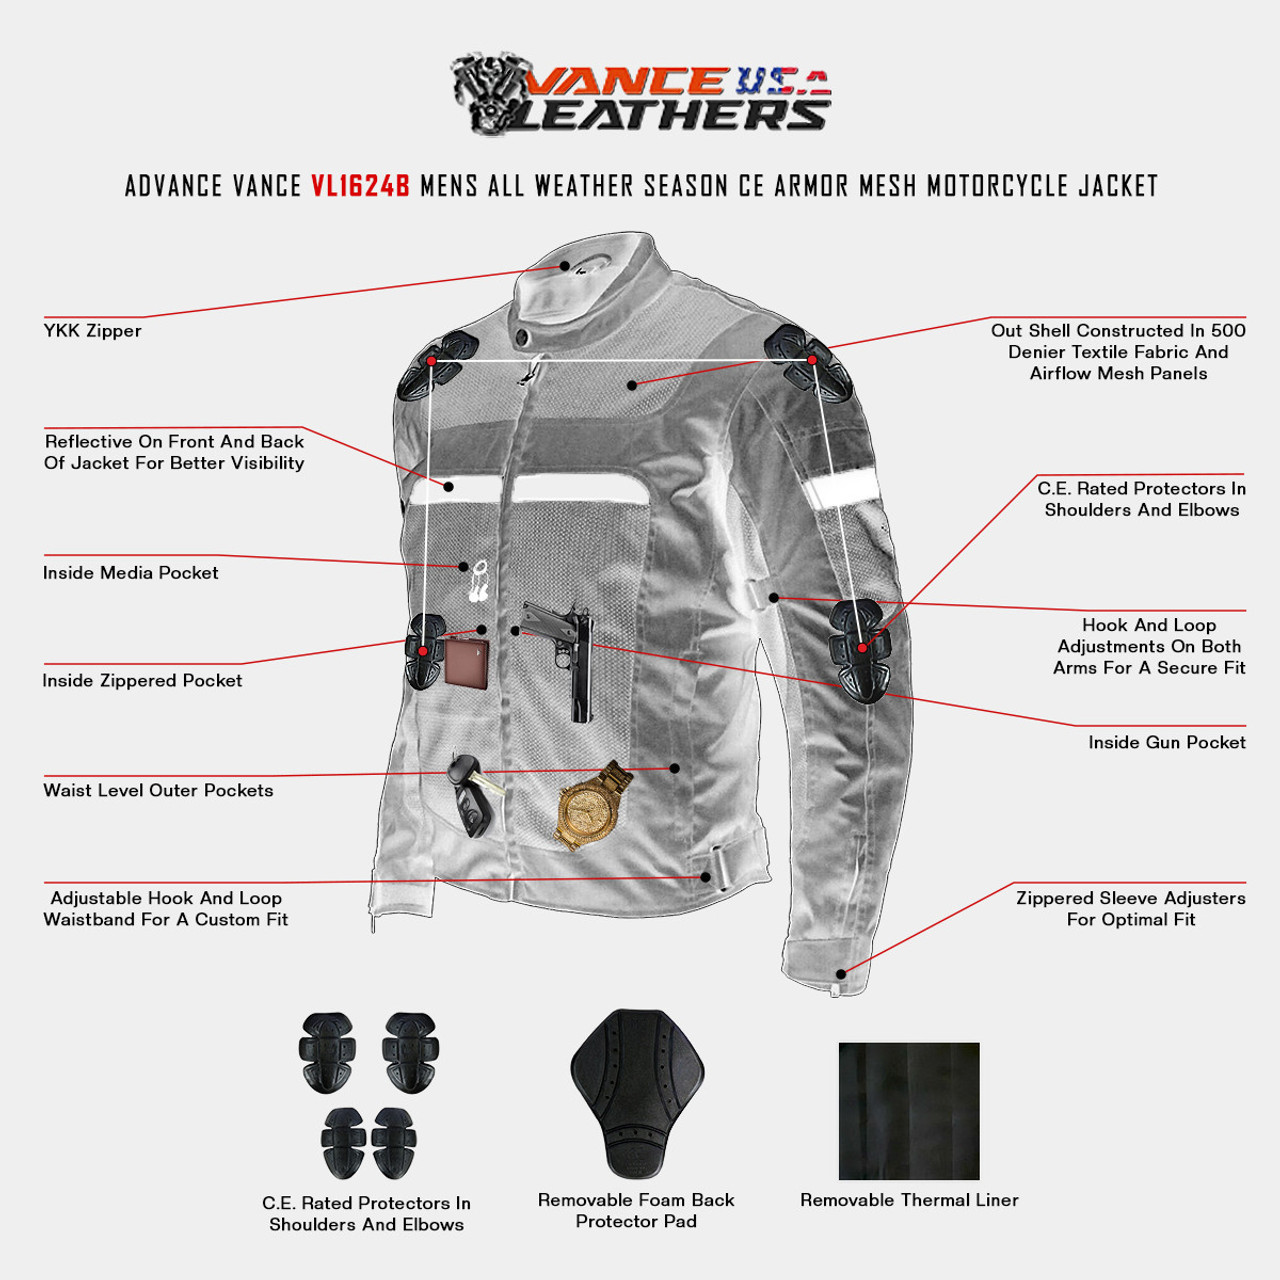 Women's Armored Motorcycle Jacket - Shirt, Level 2 Protection